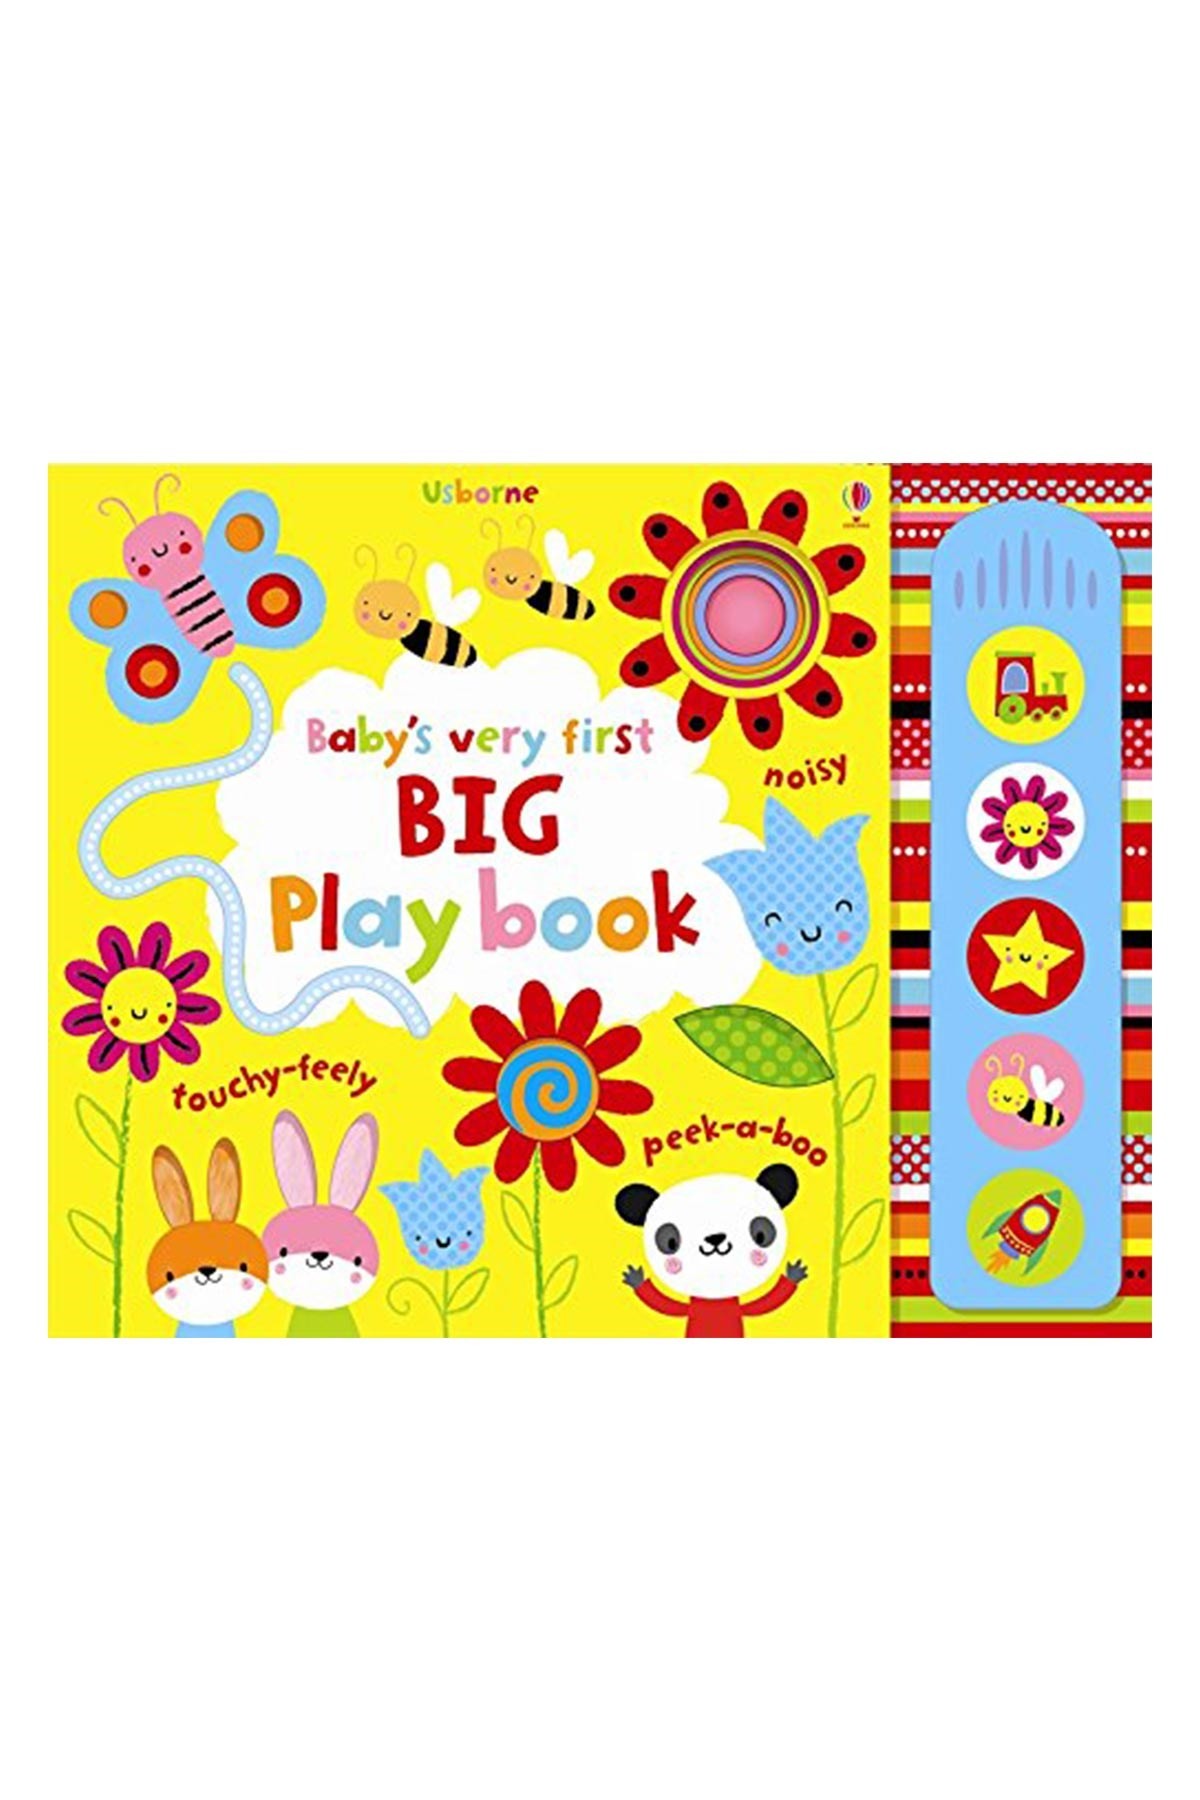 The Usborne Baby's very first BIG Playbook